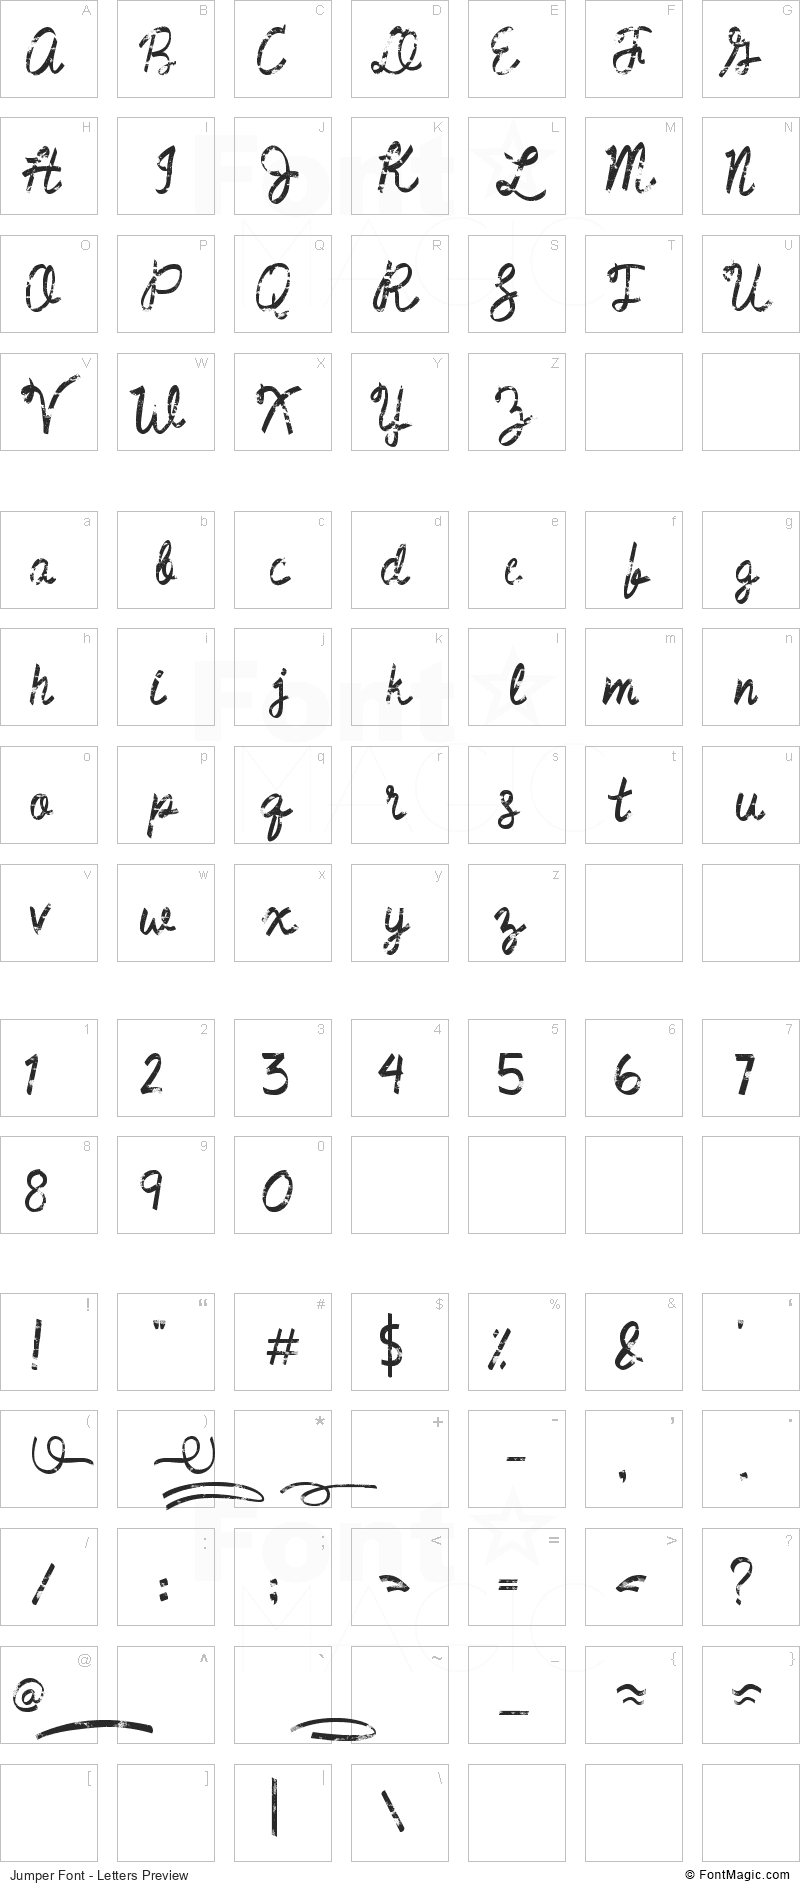 Jumper Font - All Latters Preview Chart